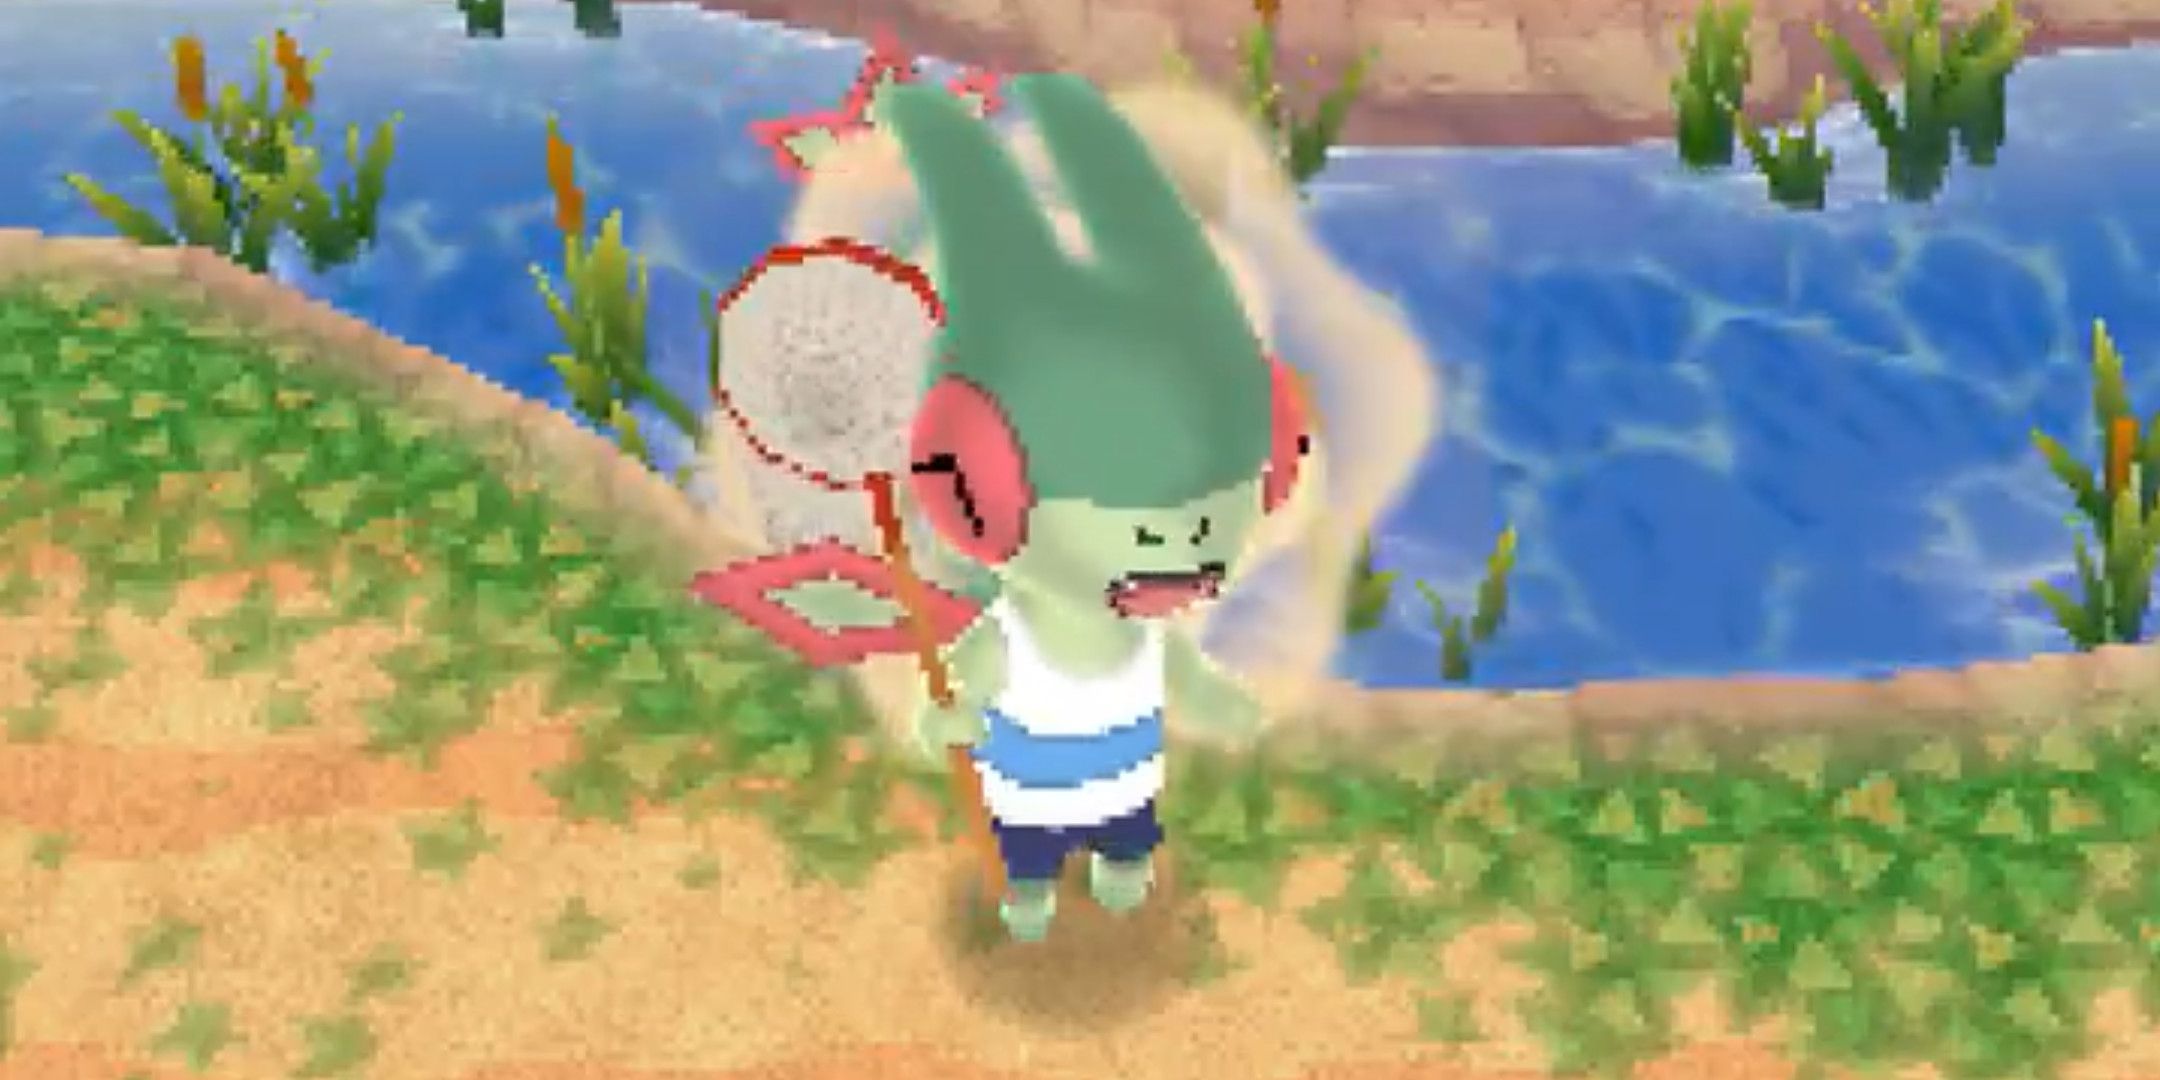 Flygon as an Animal Crossing villager holding a net